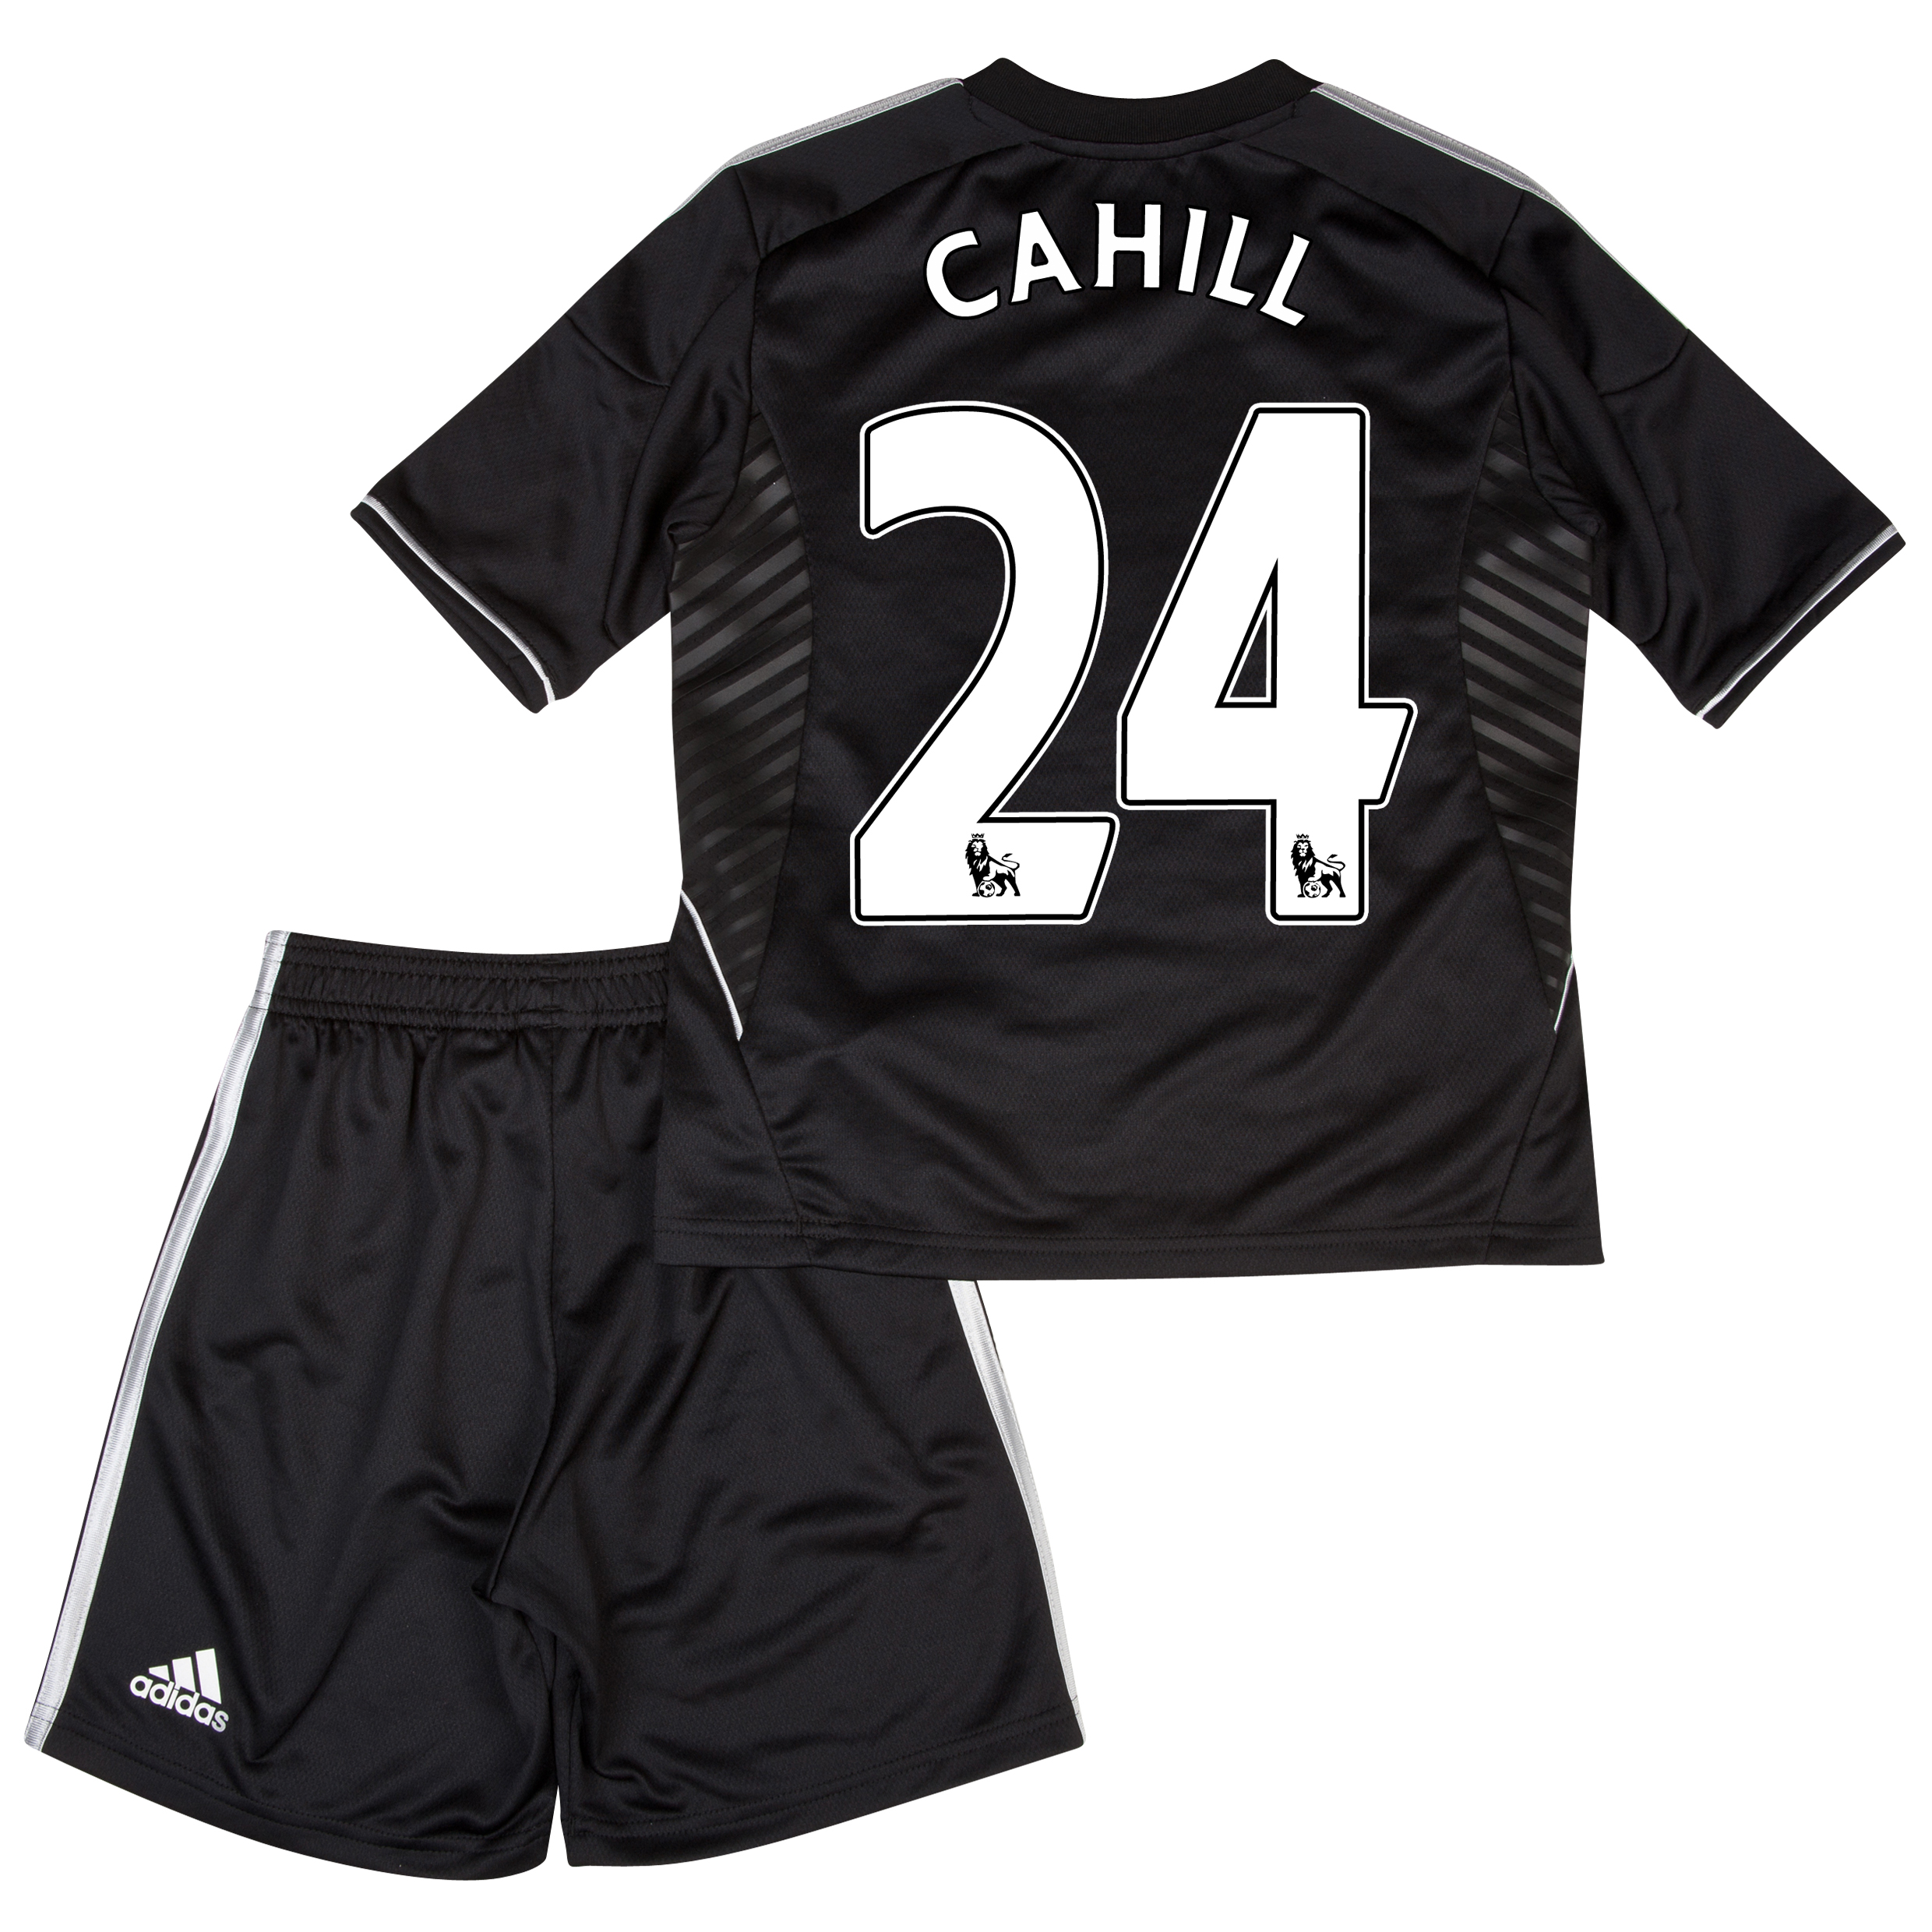 Chelsea Third Mini Kit 2013/14 with Cahill 24 printing